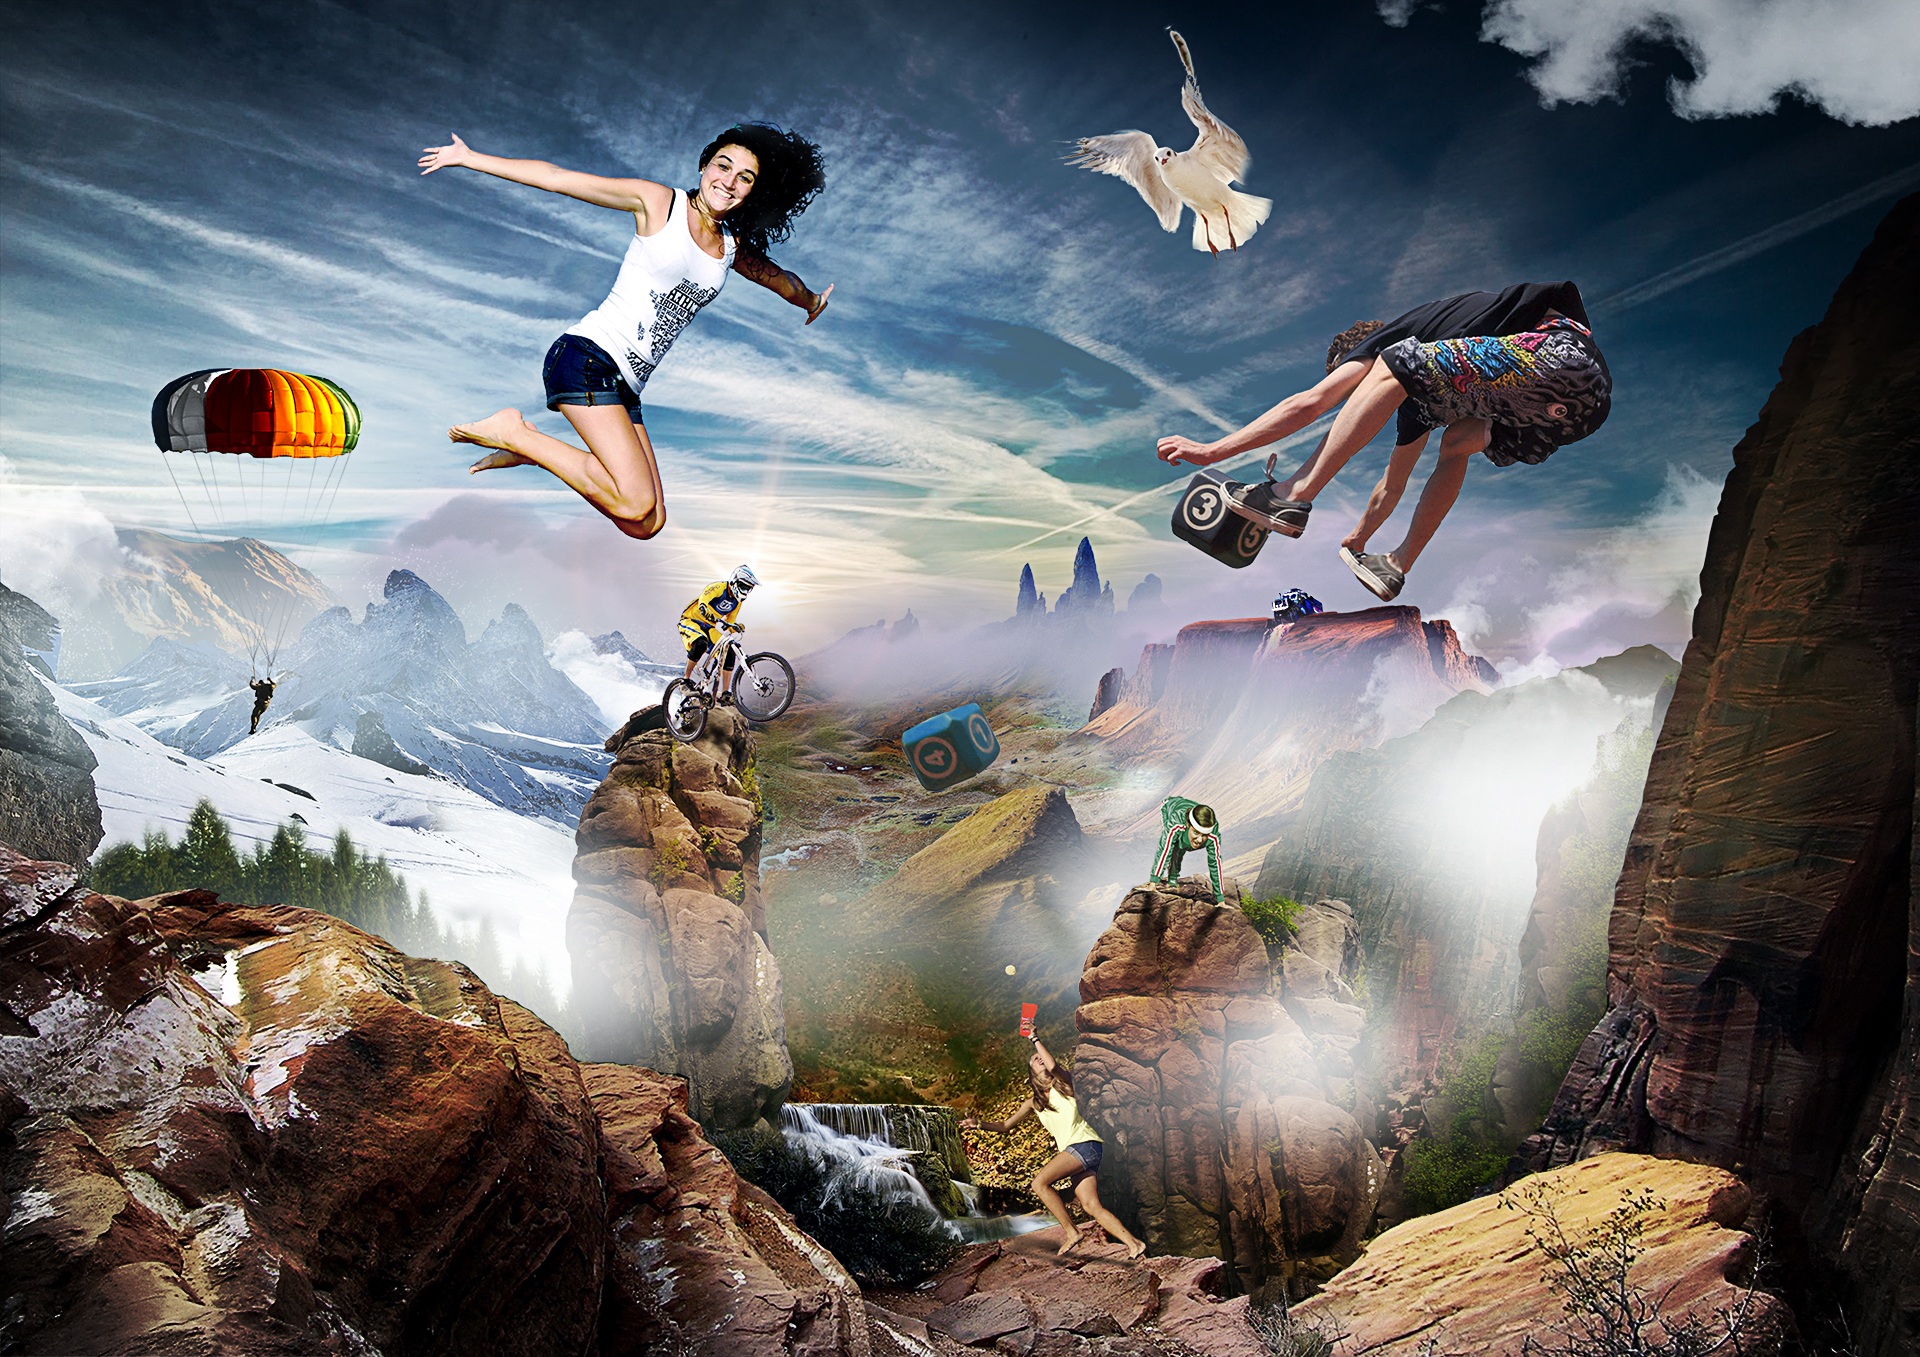 Extreme sports, flying, air, bike, bicycle, woman, fantasy